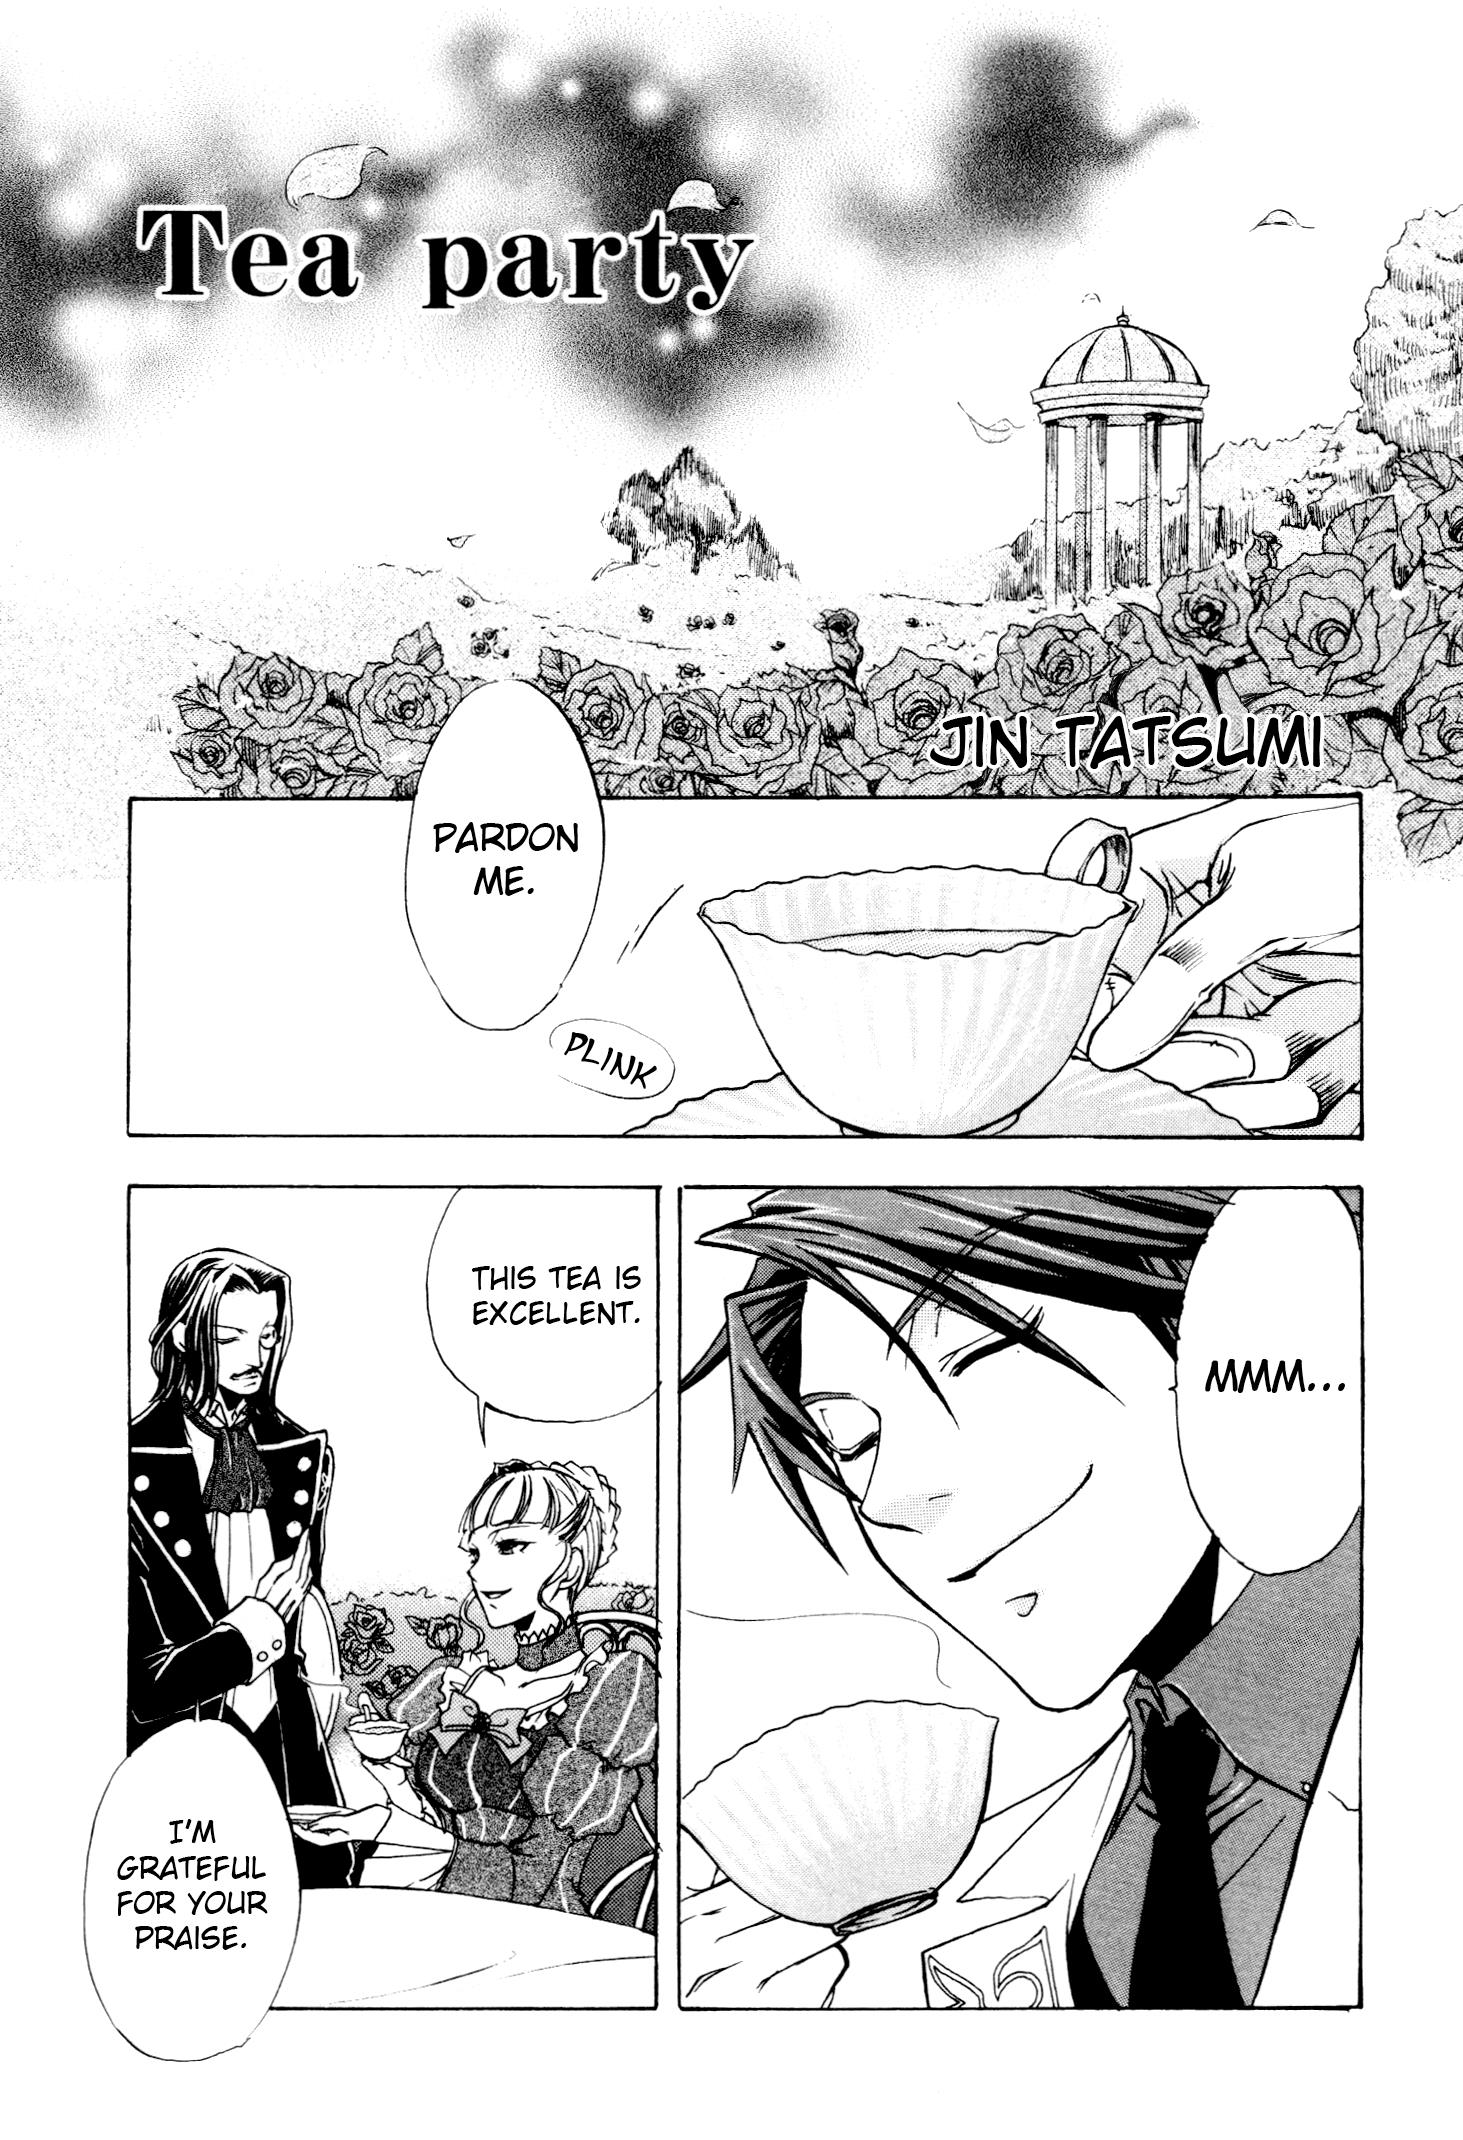 Umineko When They Cry Episode Collection Vol.2 Chapter 2: Tea Party (By Jin Tatsumi) - Picture 1